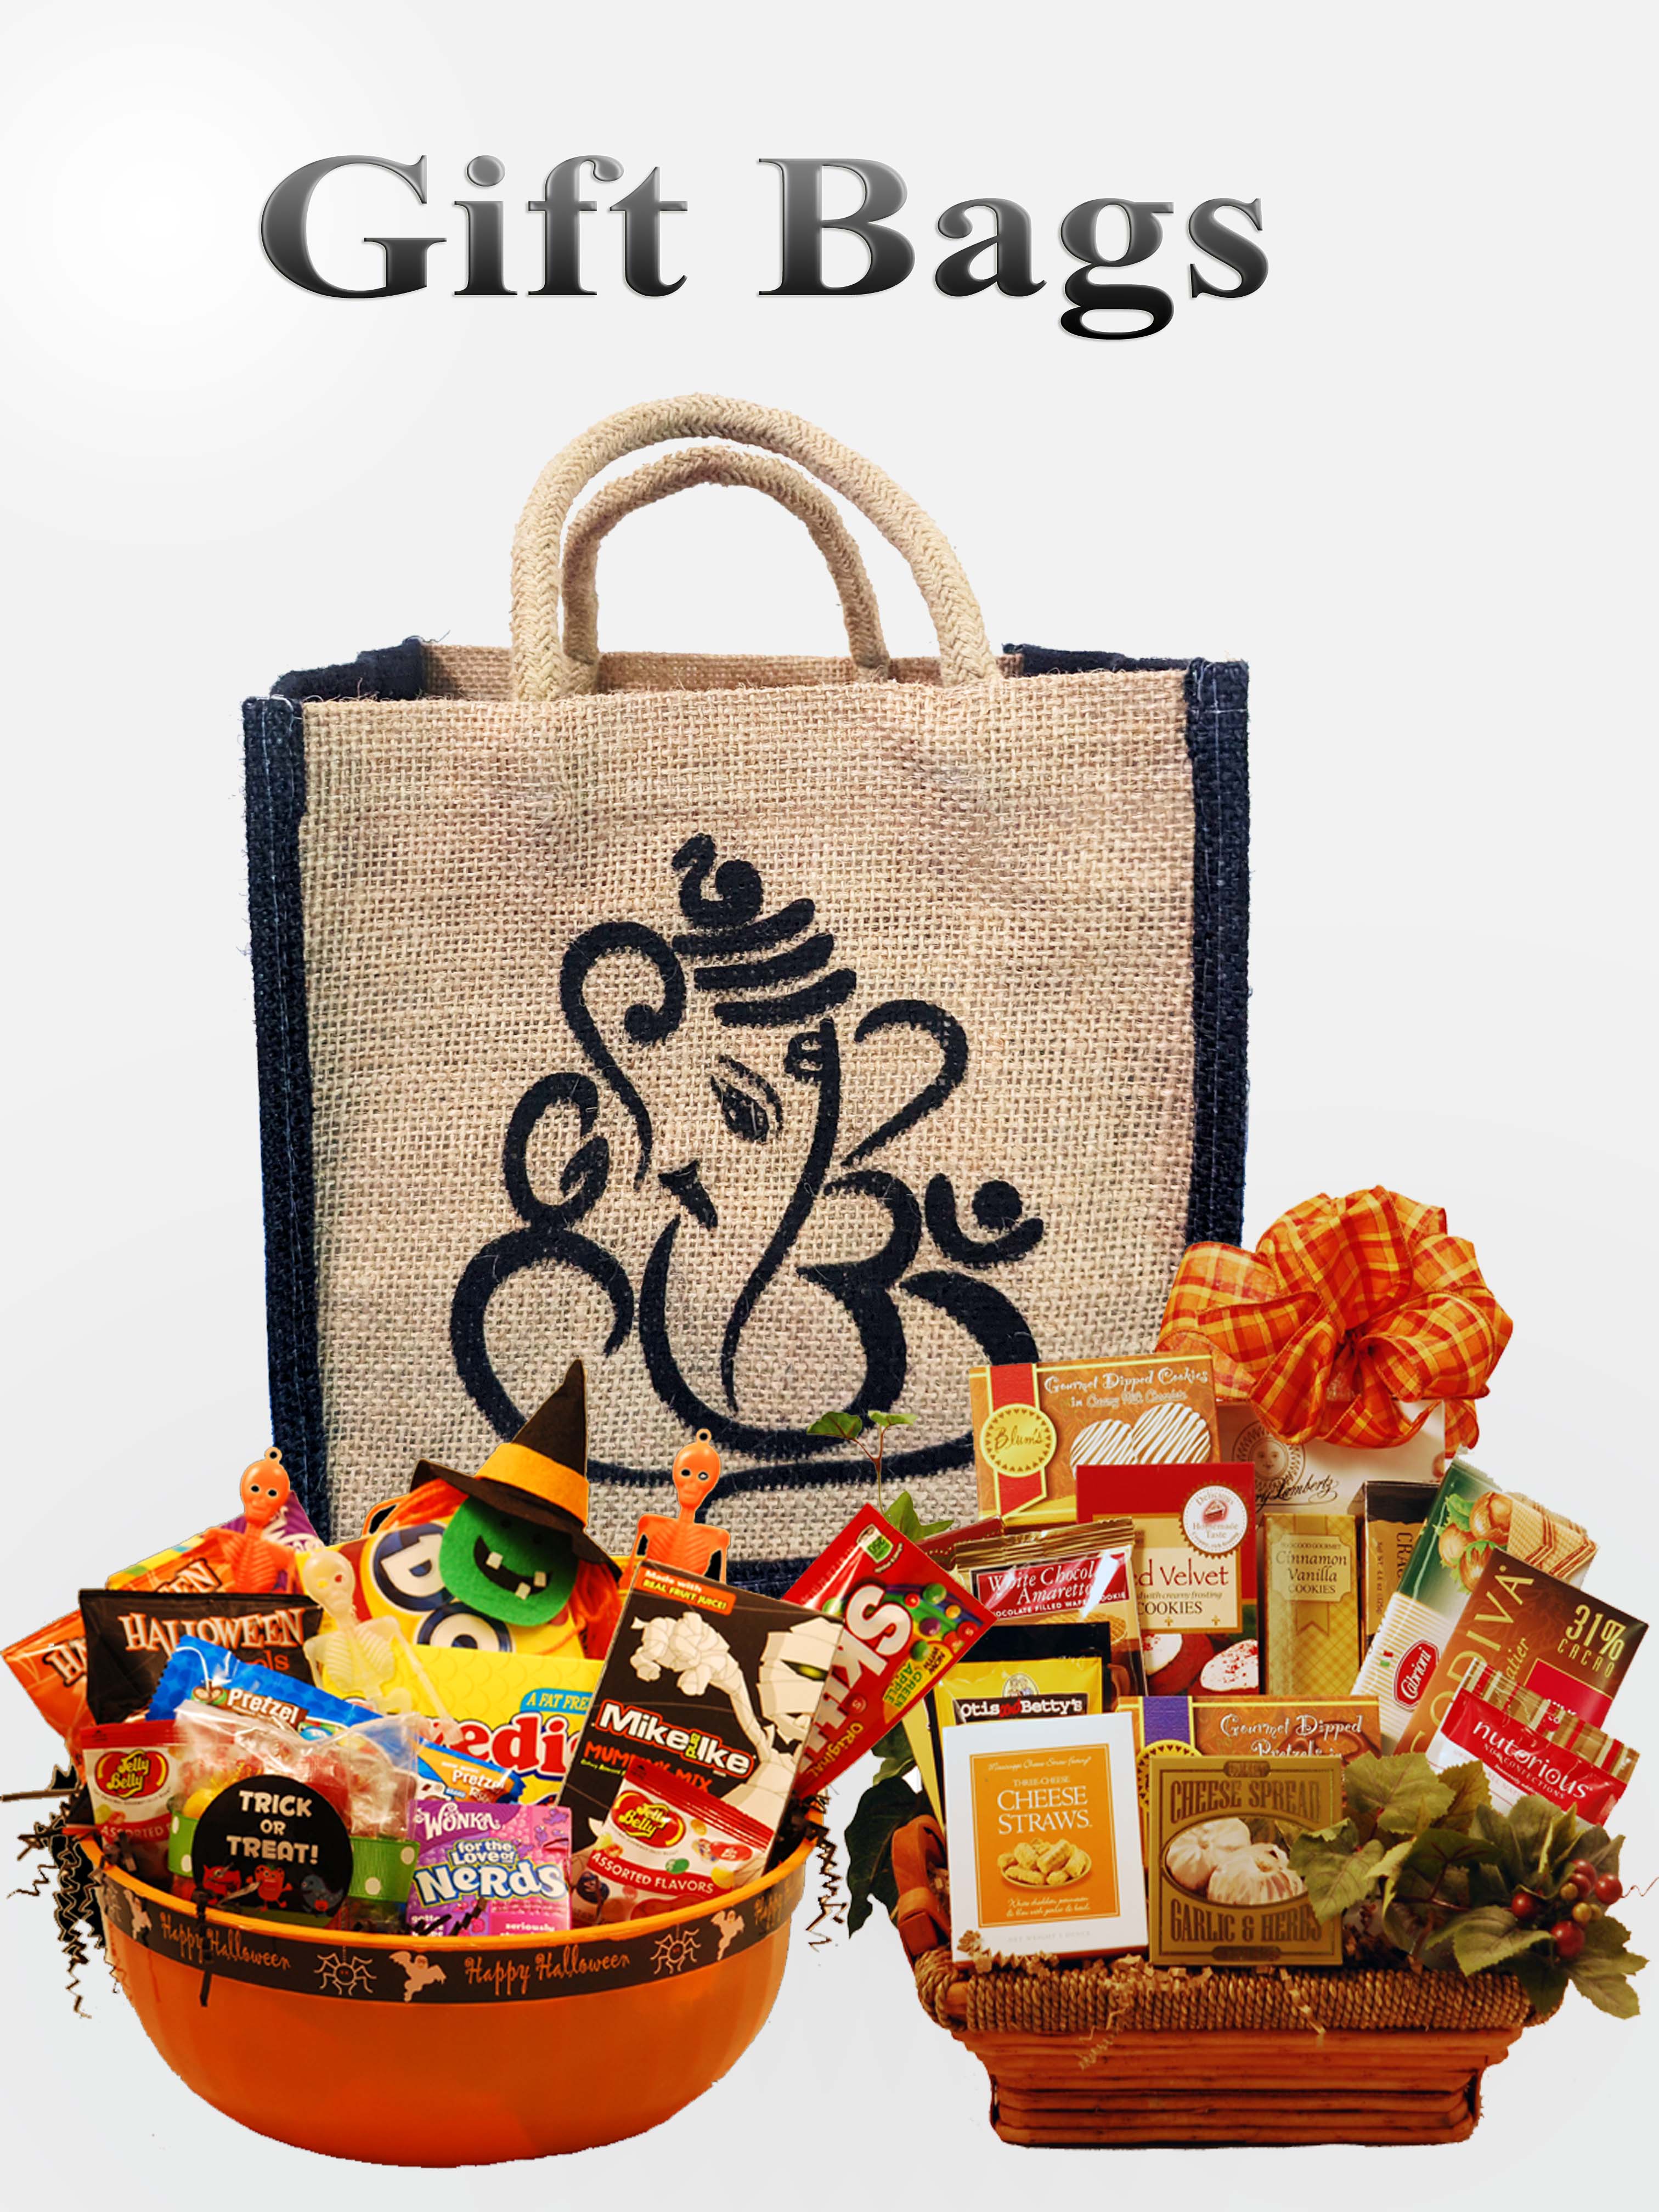 Gourmet Delights Gift Basket - meat and cheese gift baskets, One Basket -  Foods Co.